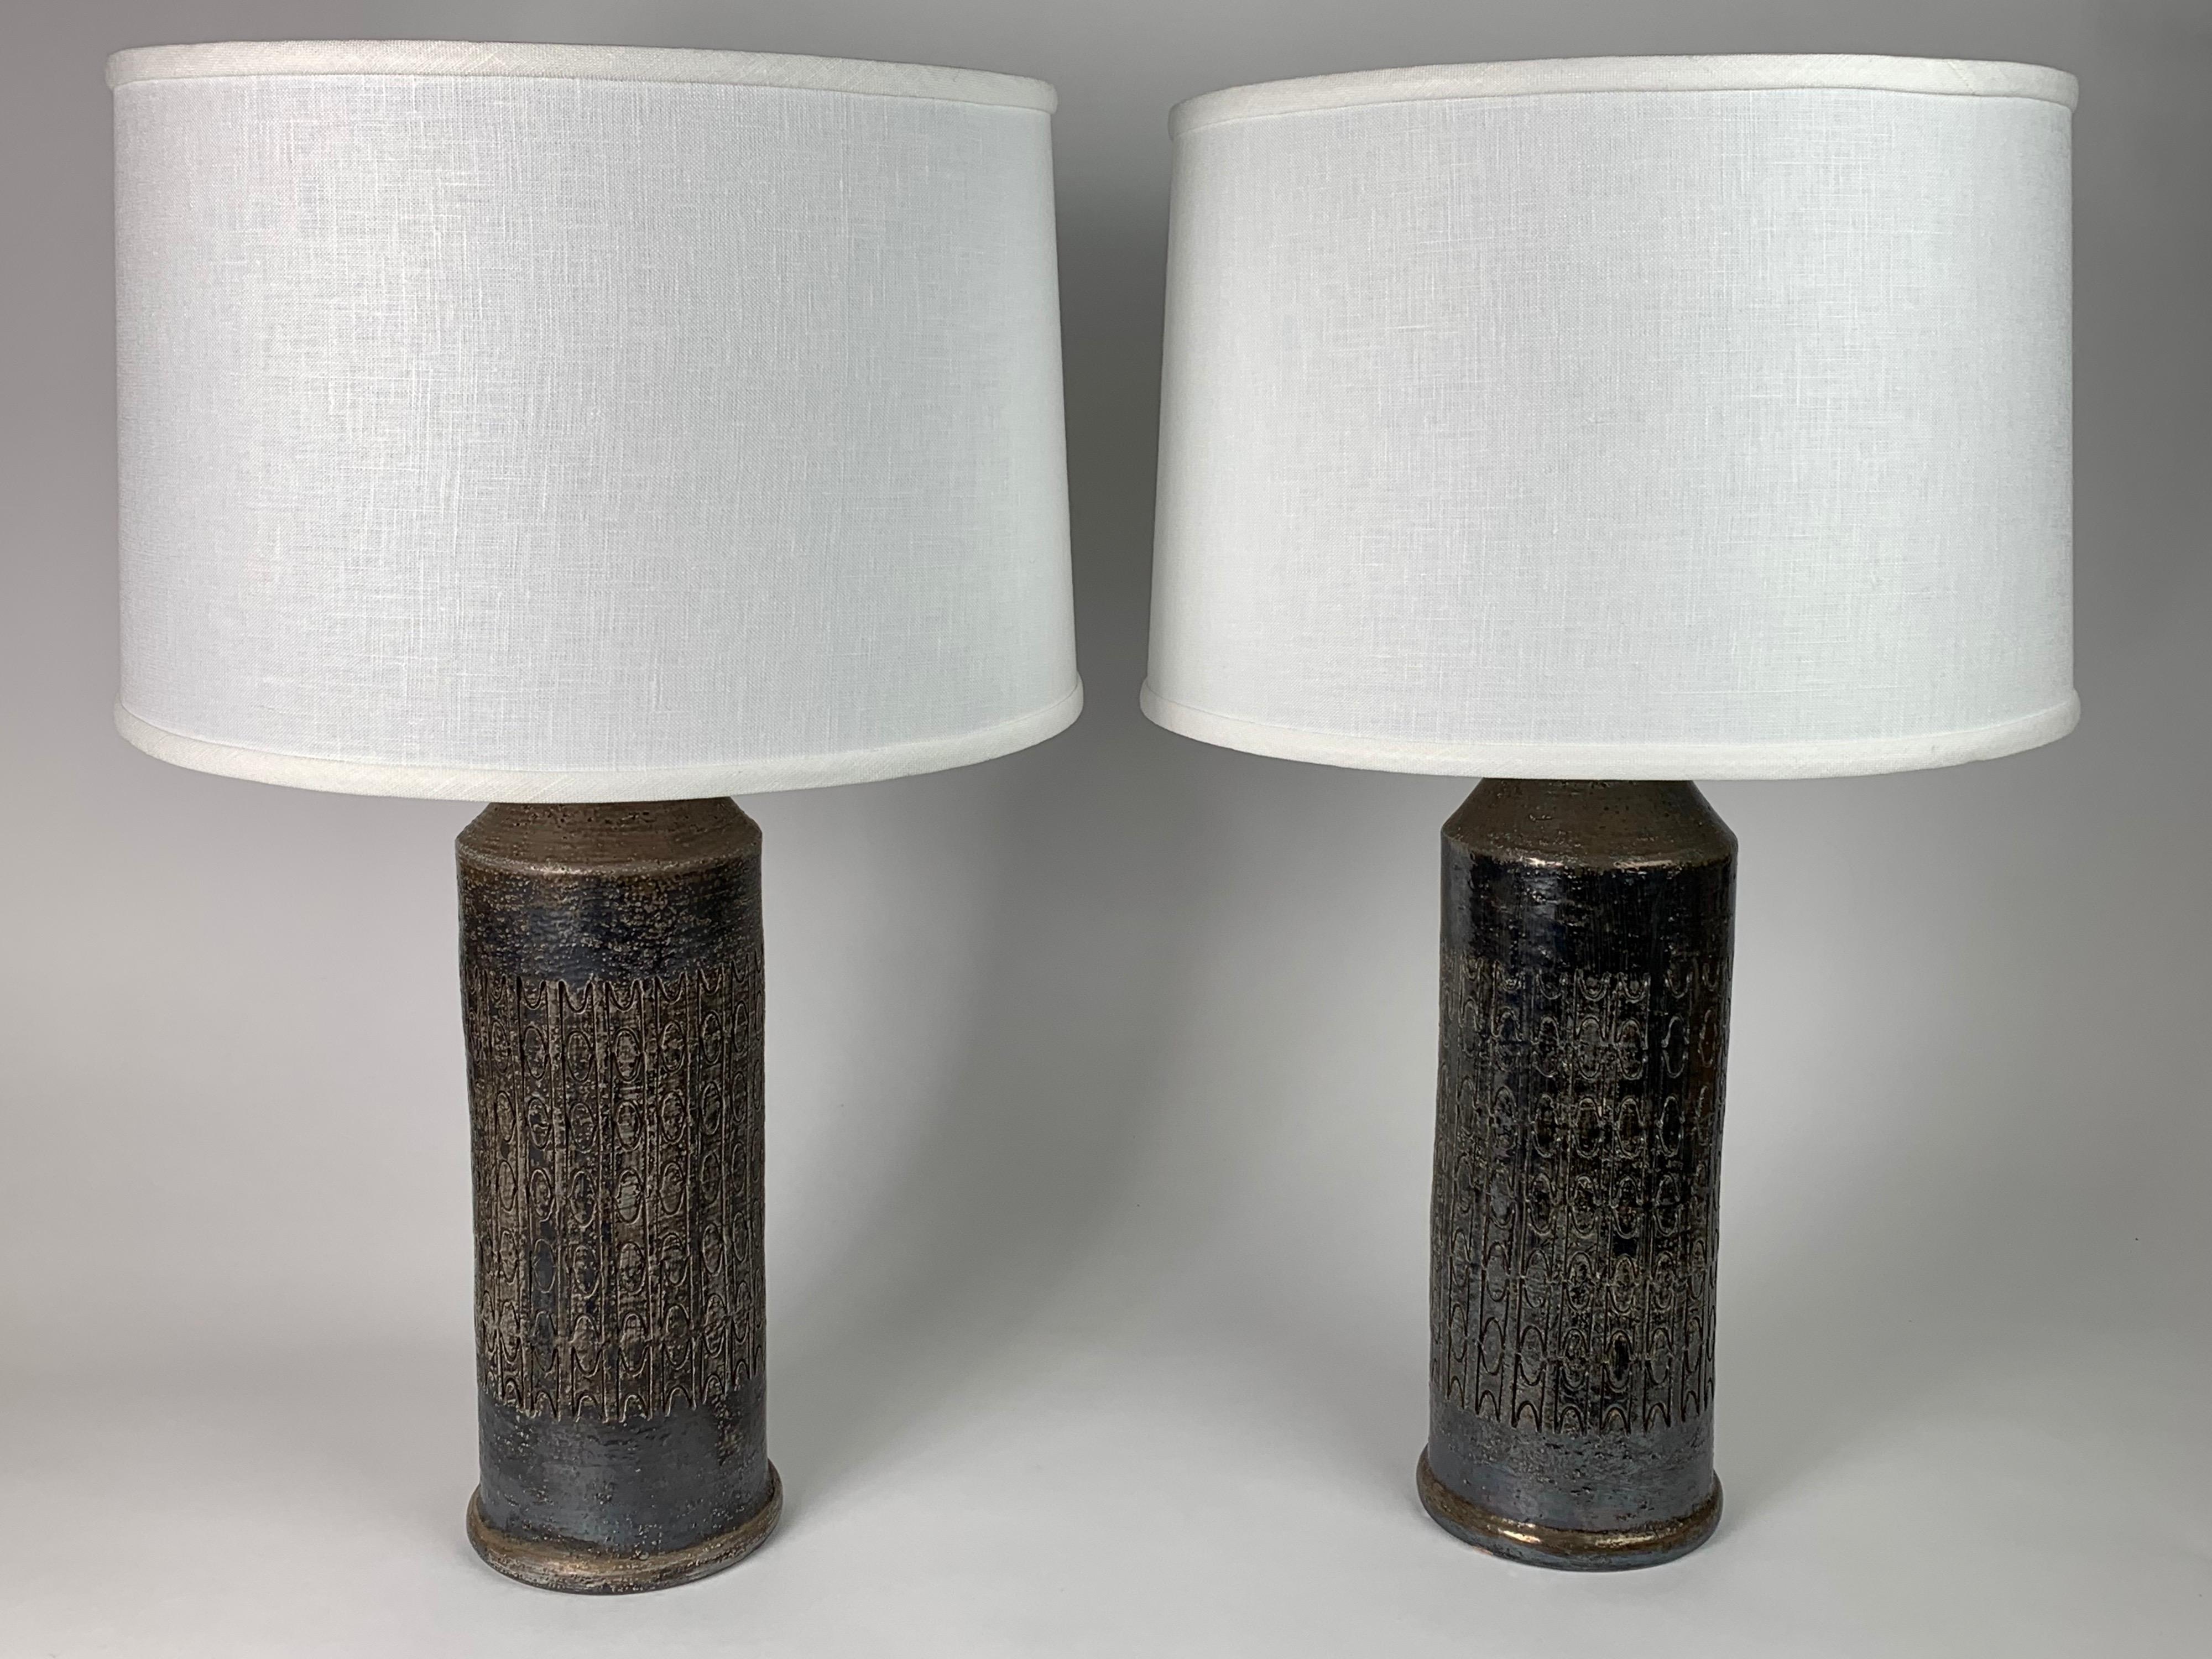 Pair of Black Bitossi Lamps, Italy, 1970 In Good Condition For Sale In Bronx, NY